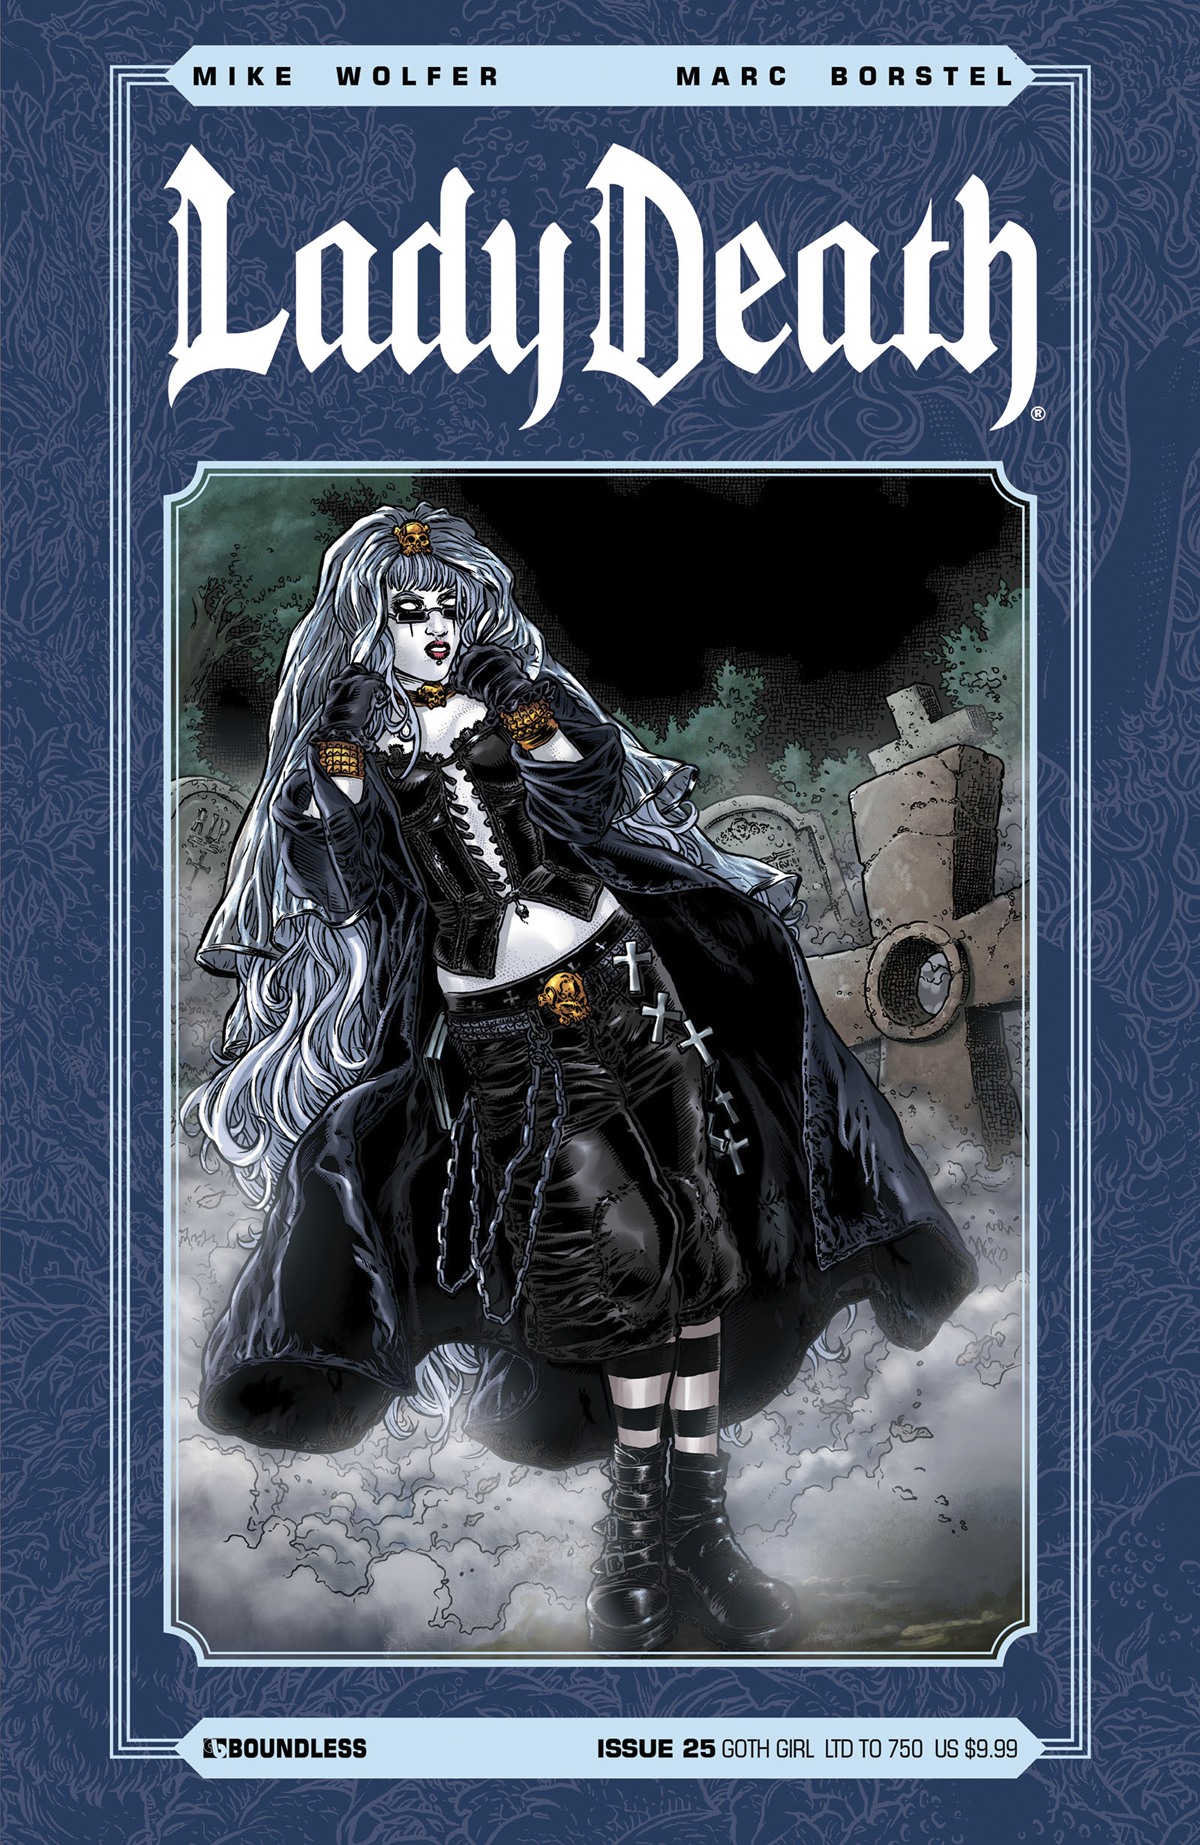 DEC141290 - LADY DEATH (ONGOING) #25 GOTH GIRL CVR (MR) - Previews